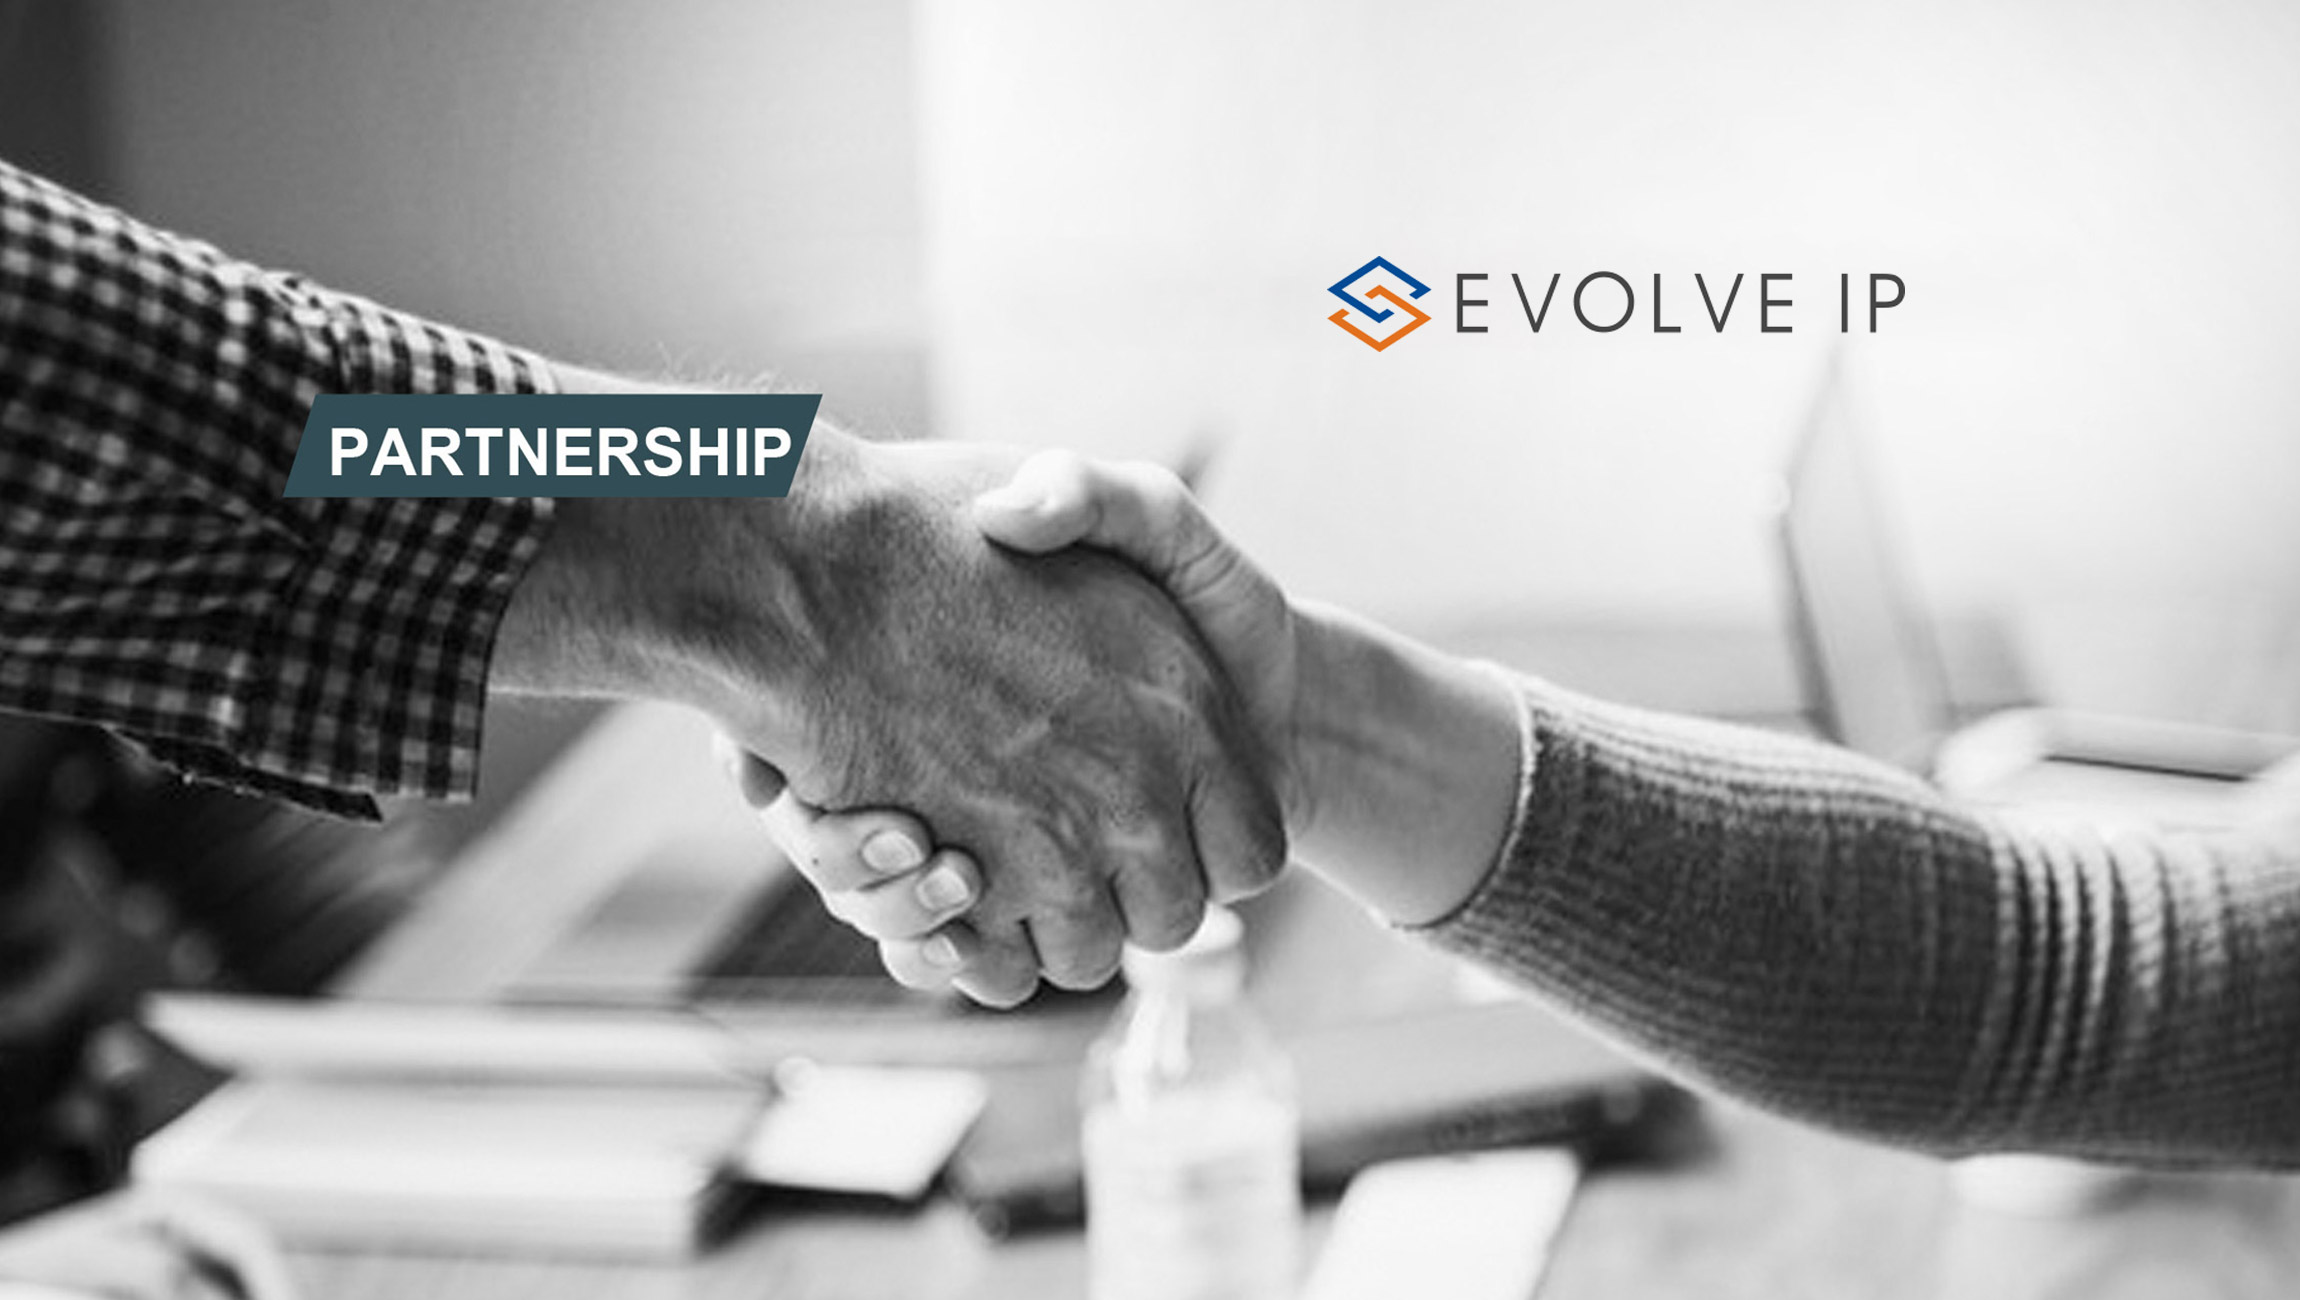 Evolve IP and Dubber Announce Partnership to Provide Unified Call Recording and Voice Intelligence Services